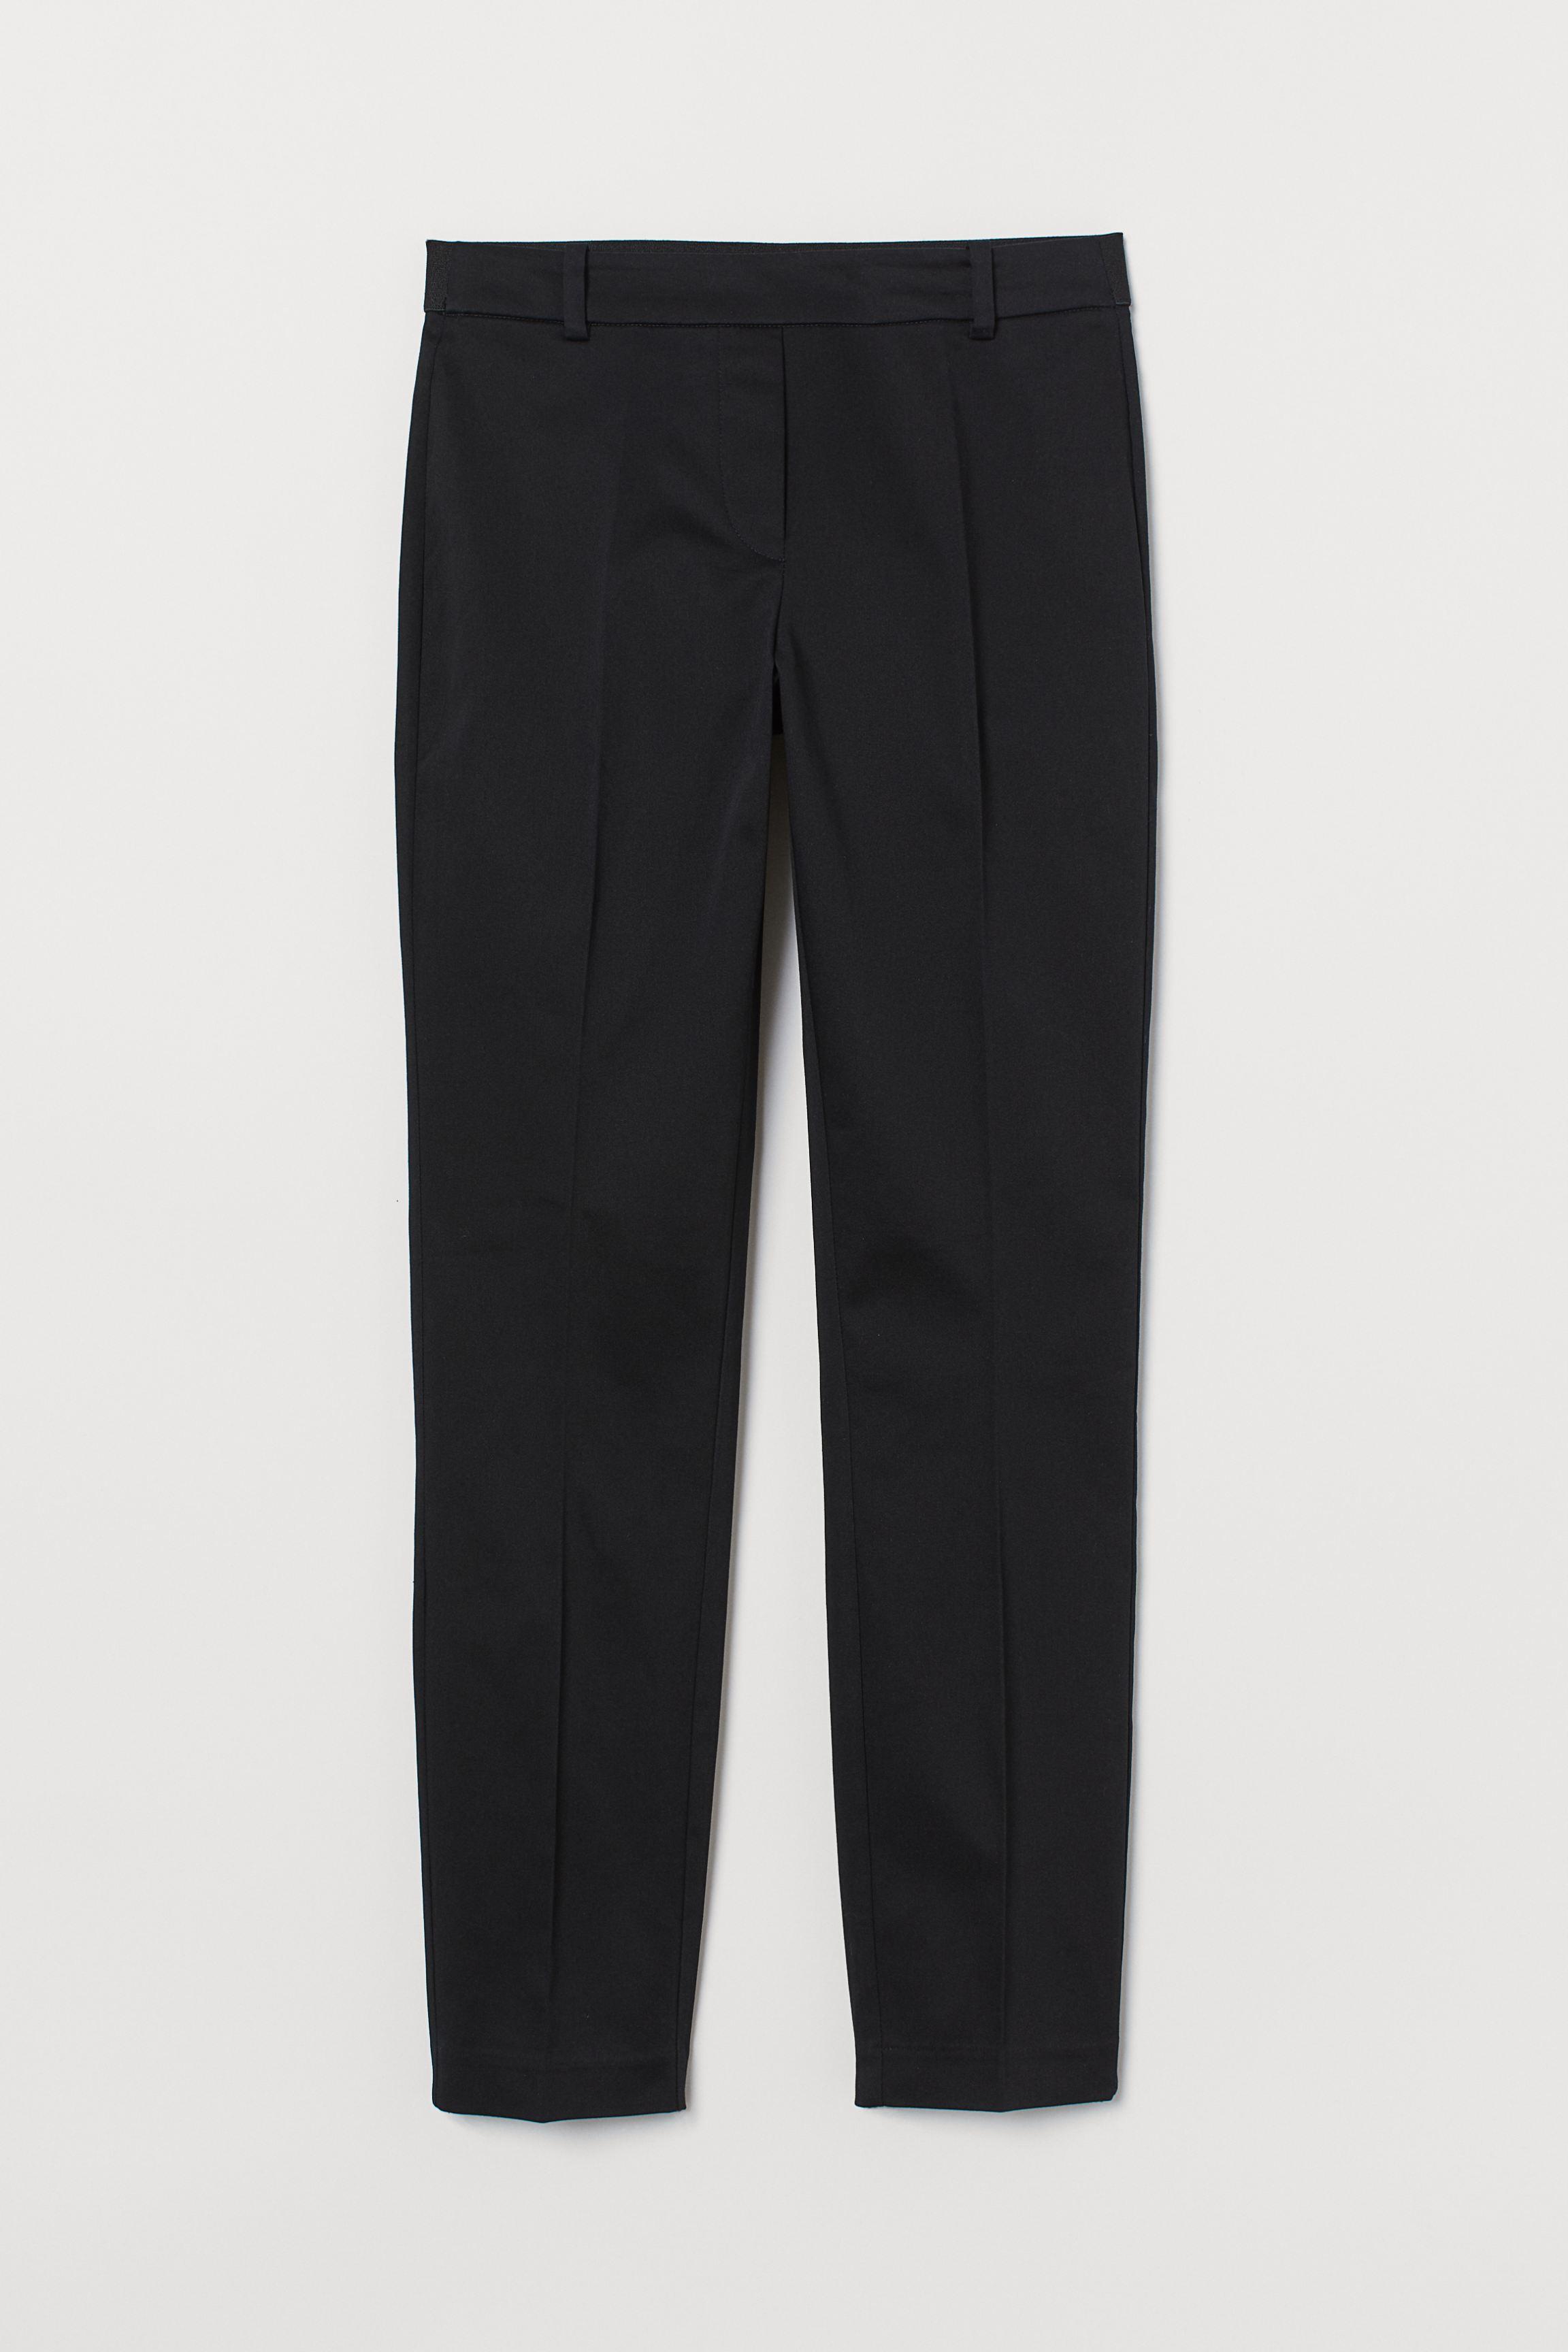 H&M Ankle-length Trousers in Black - Lyst